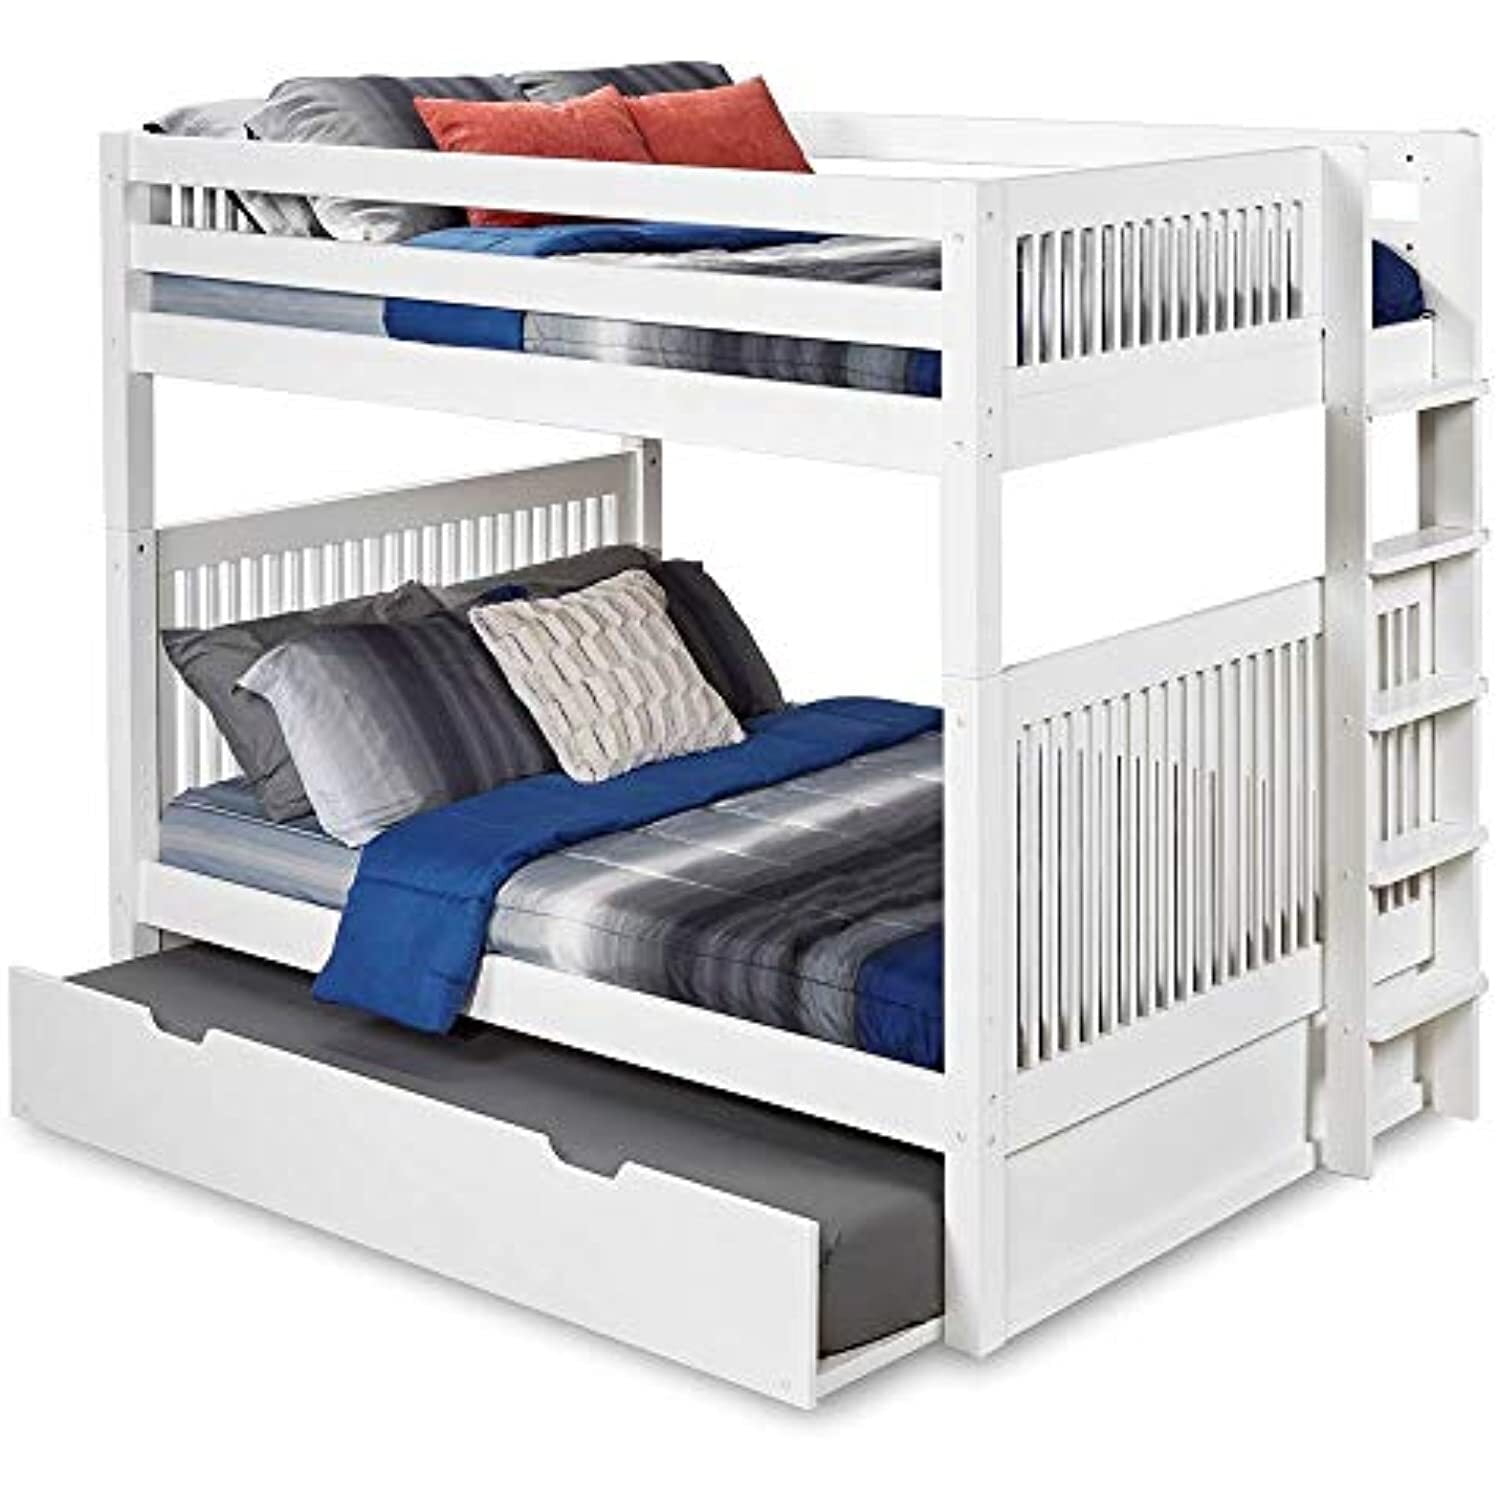 C1613l-tr Camaflexi Full Mission Headboard, End Ladder Over Bunk Bed With Trundle, White - Twin